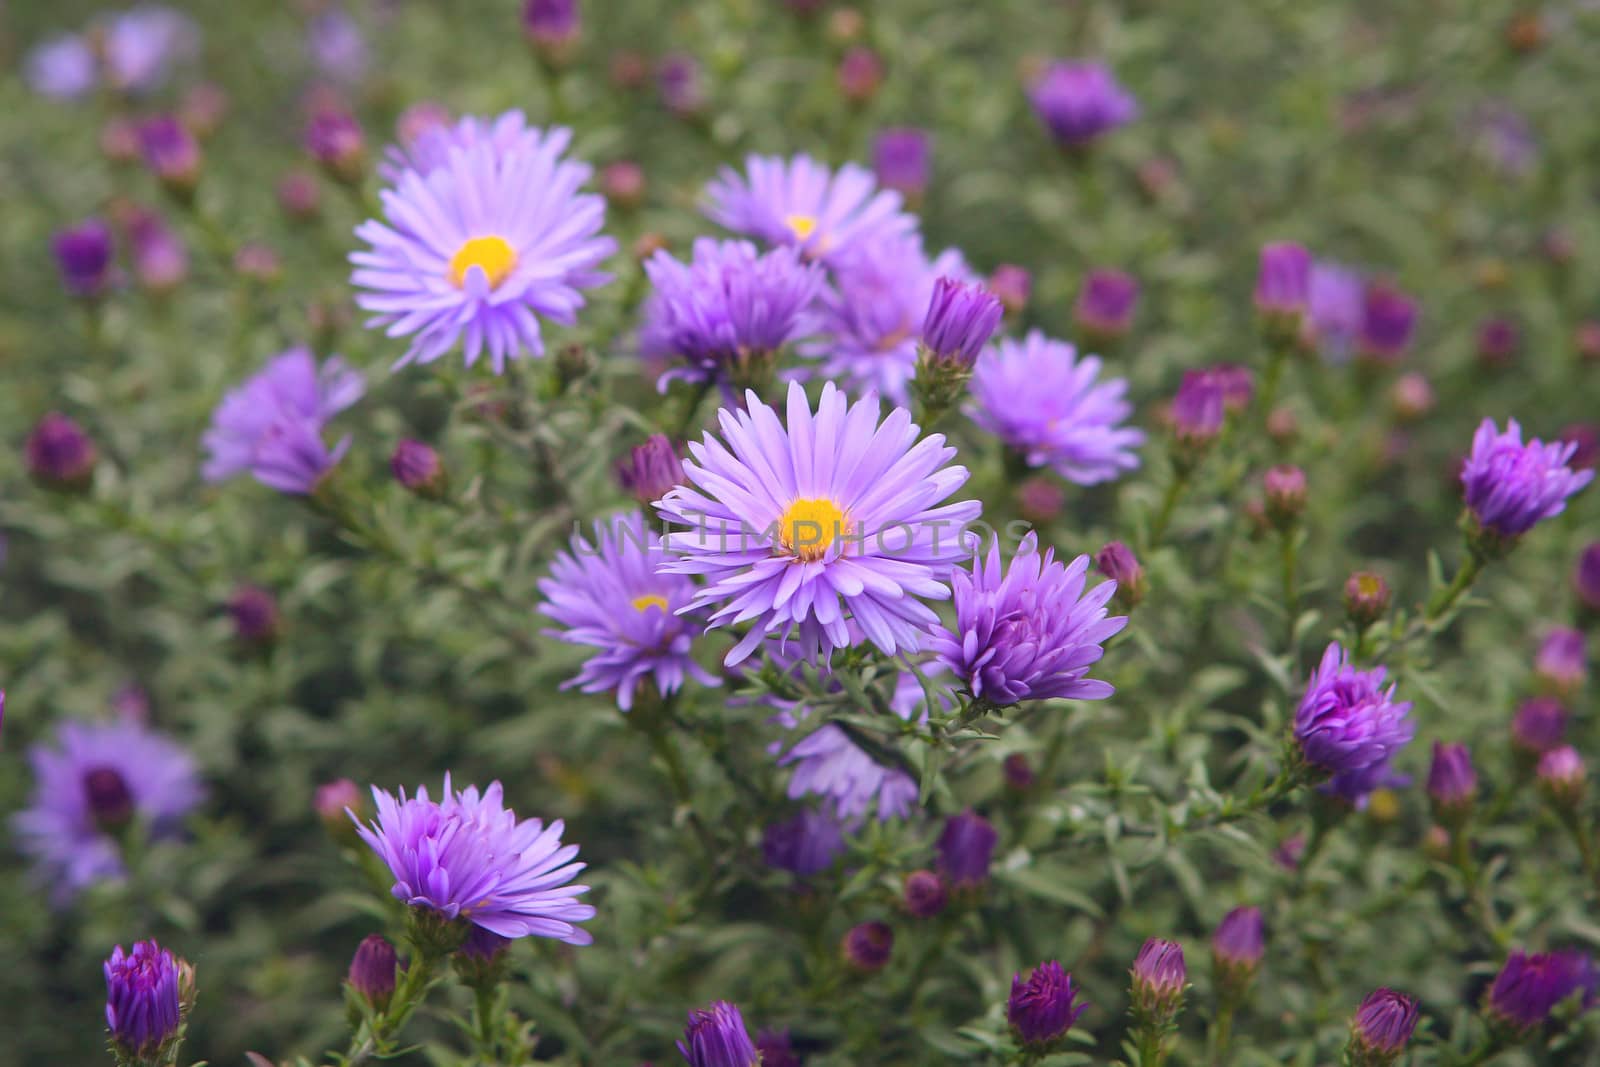 Blue Asters flowers in the Autumn Garden by cococinema